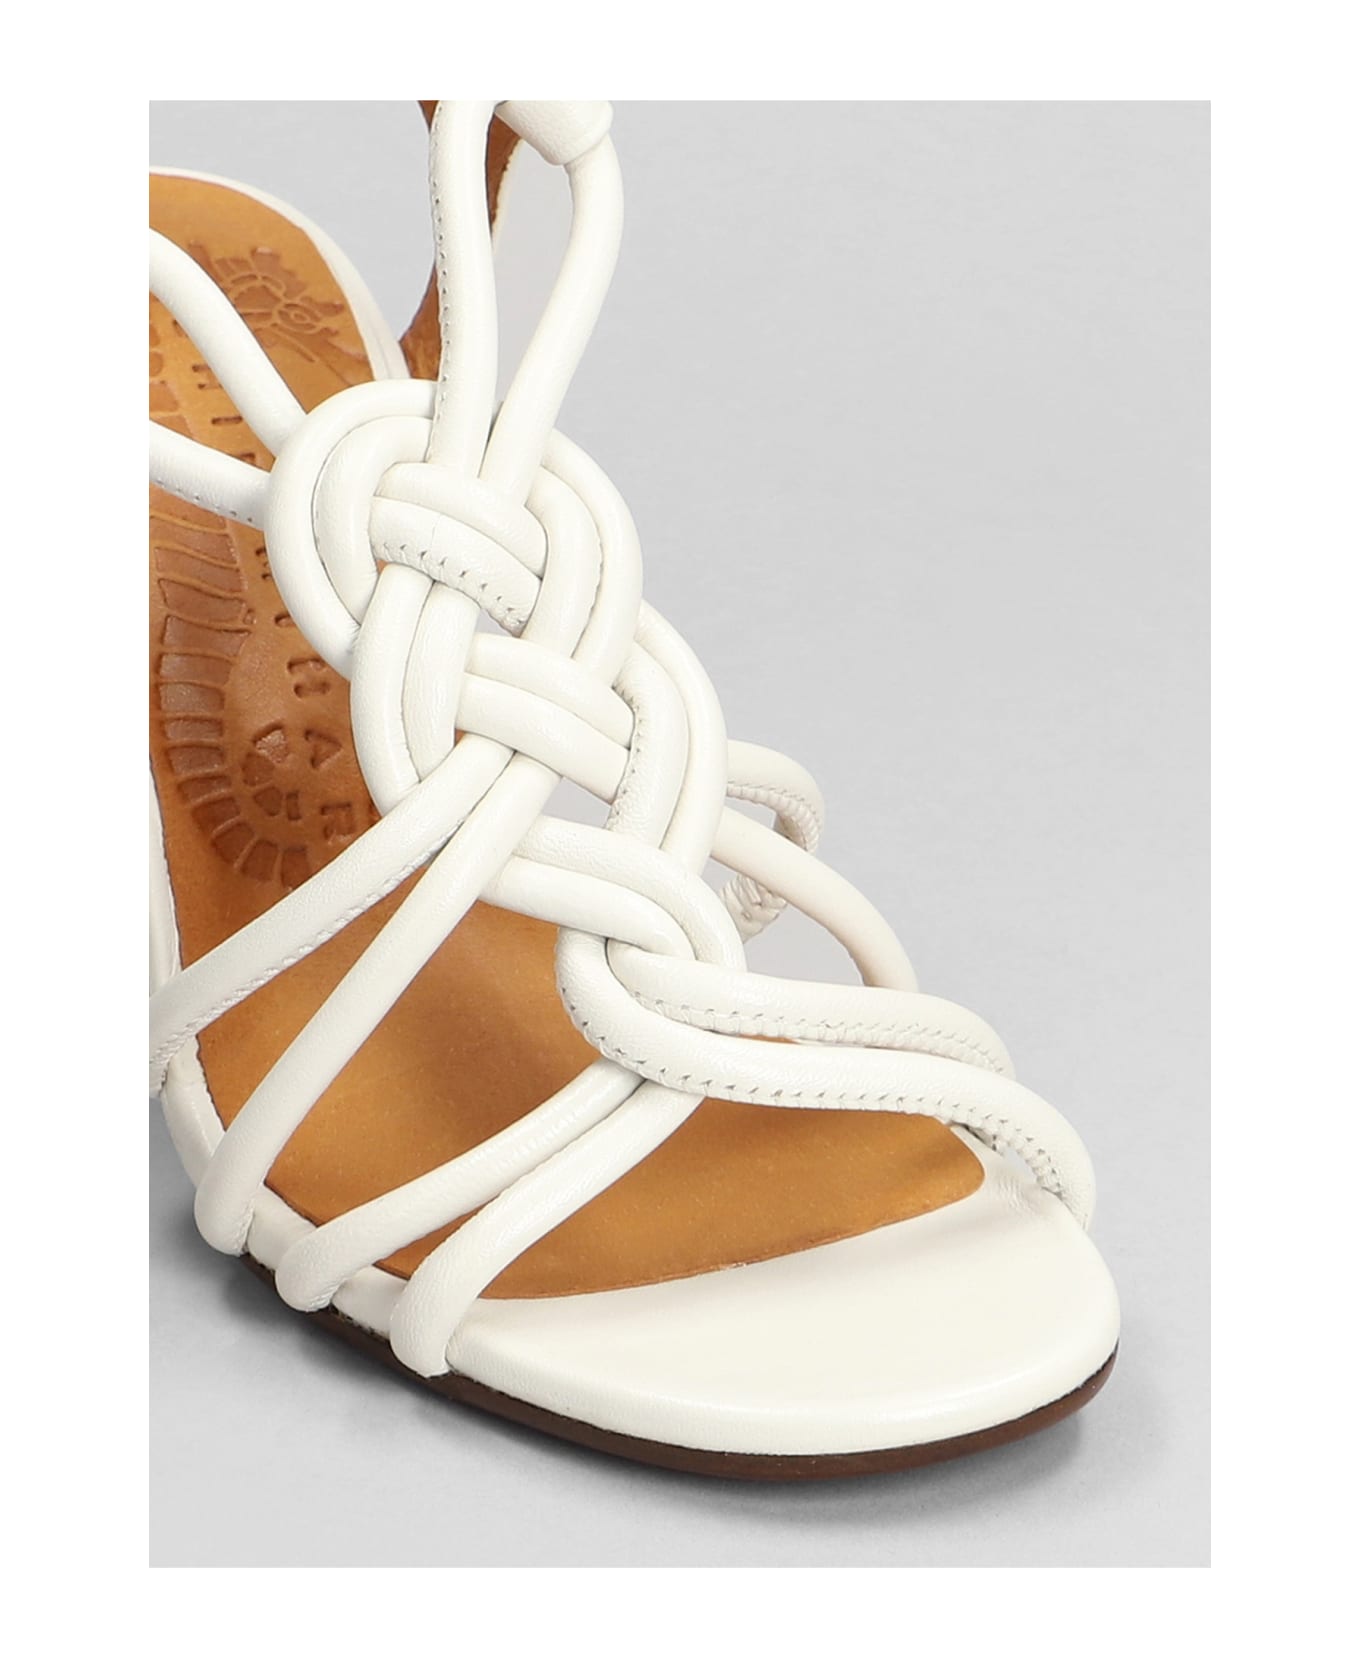 Chie Mihara Bane Sandals In White Leather - white サンダル